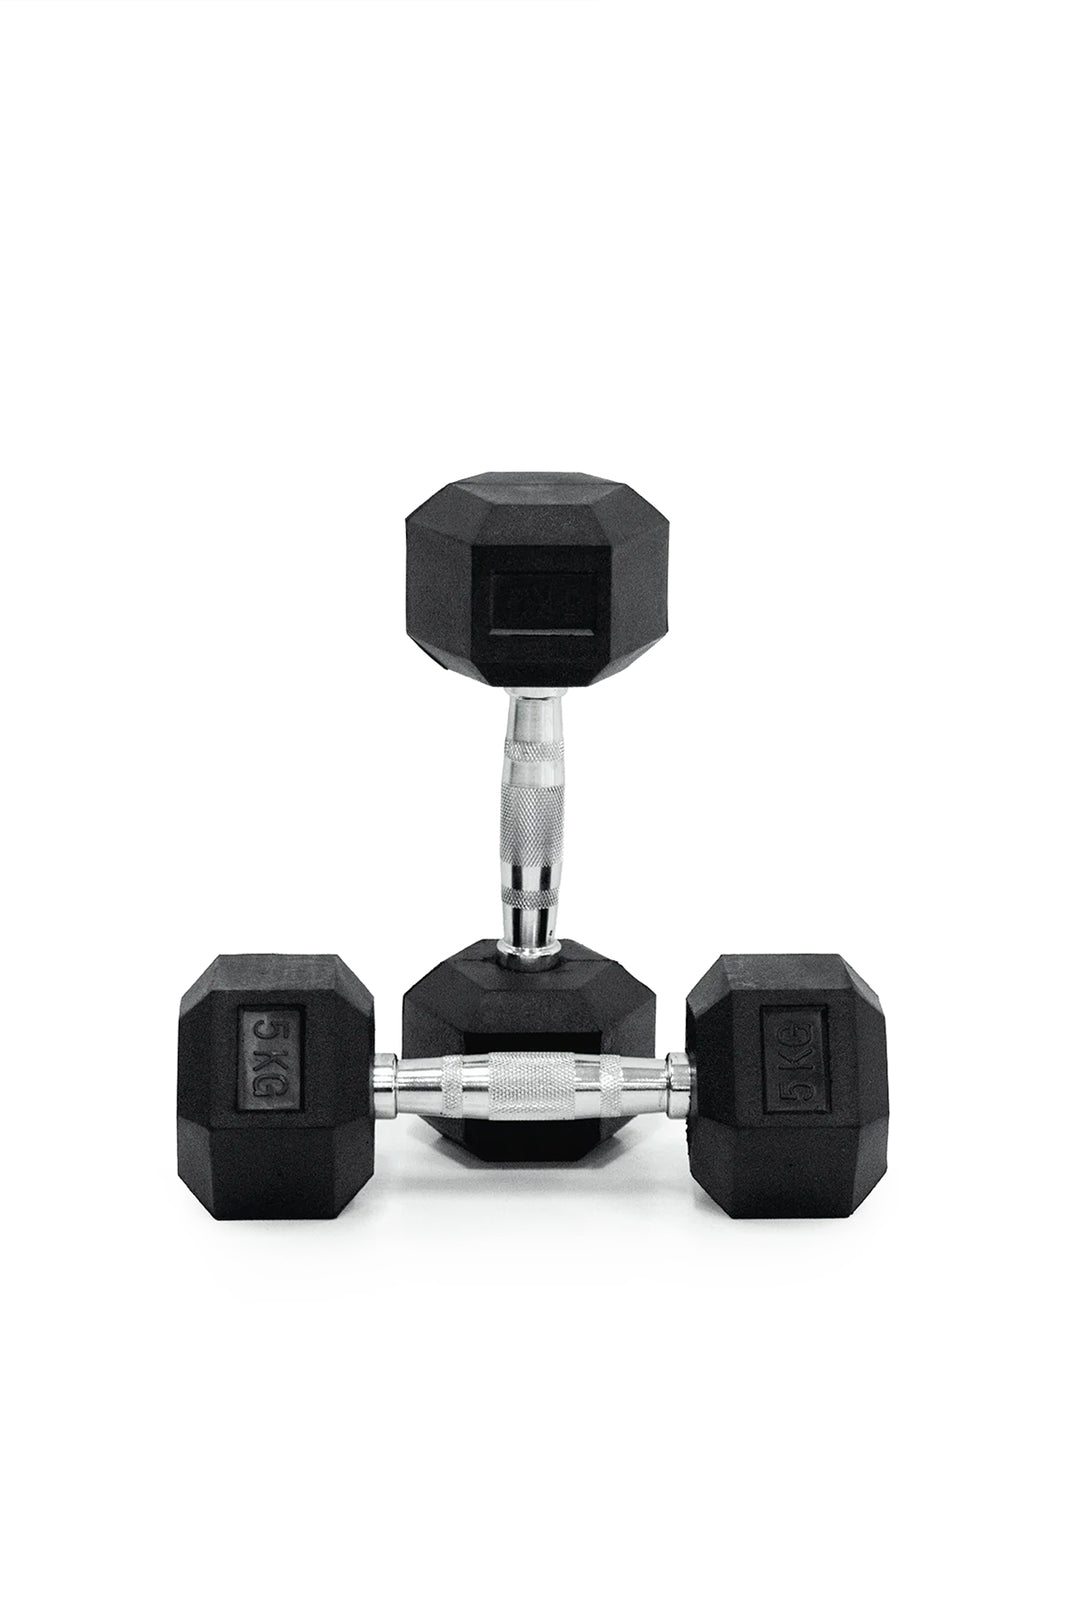 5kg Body Iron Commercial Rubber Hex Dumbbell Pair